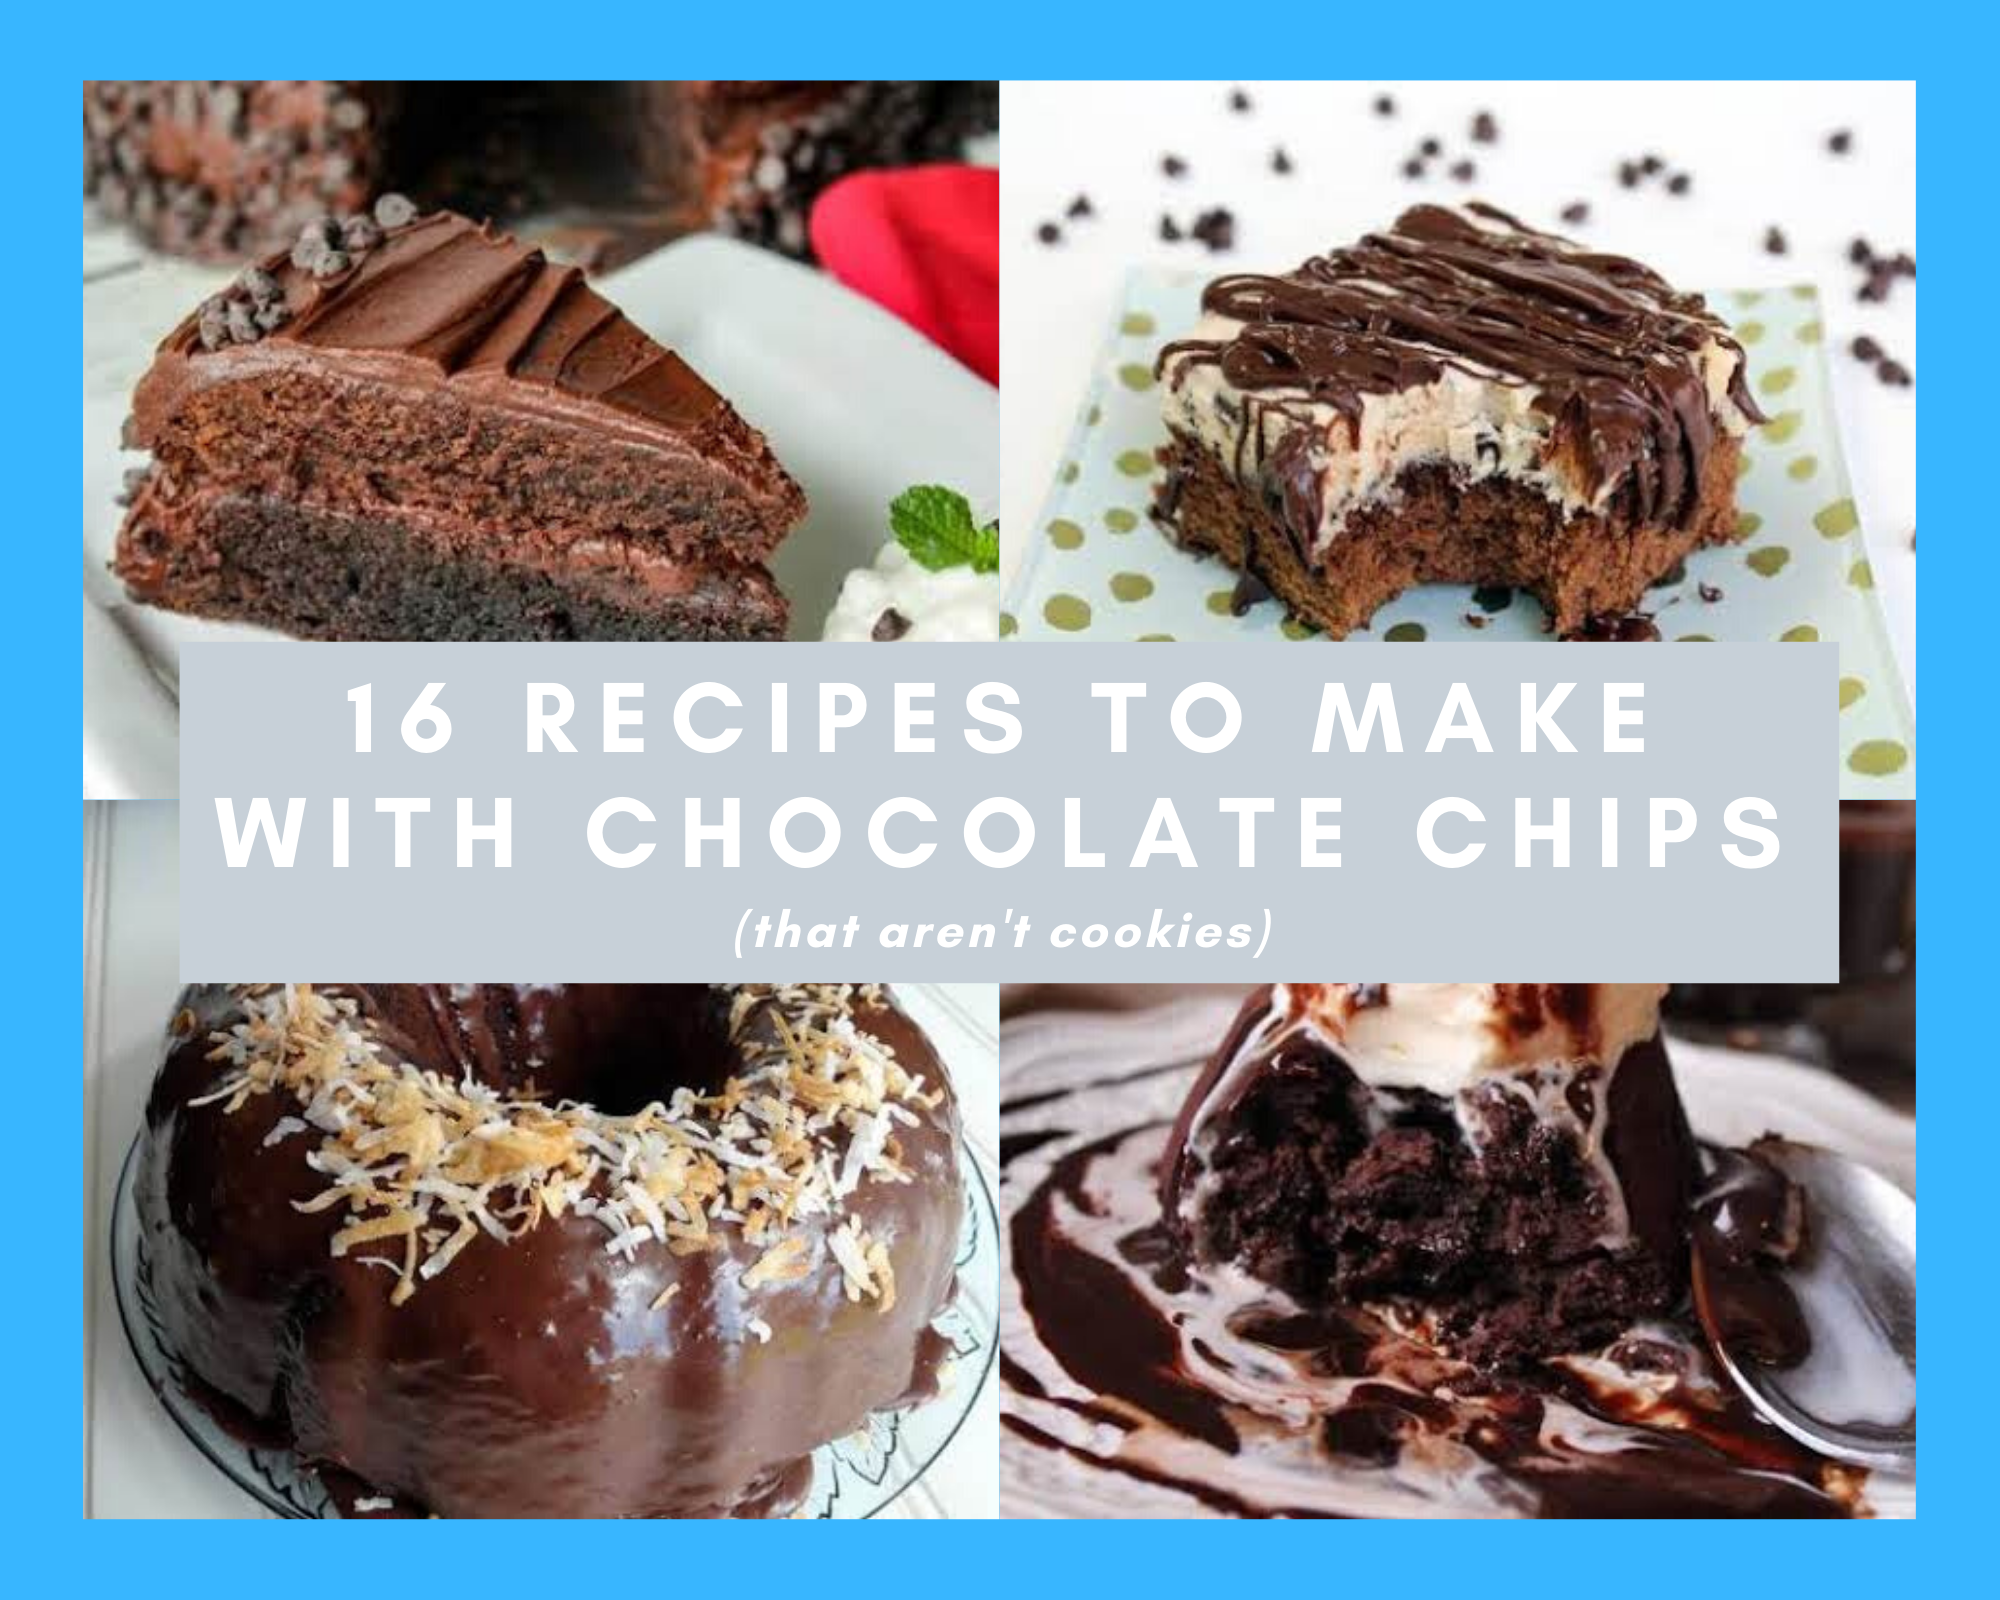 16 Recipes to Make with Chocolate Chips